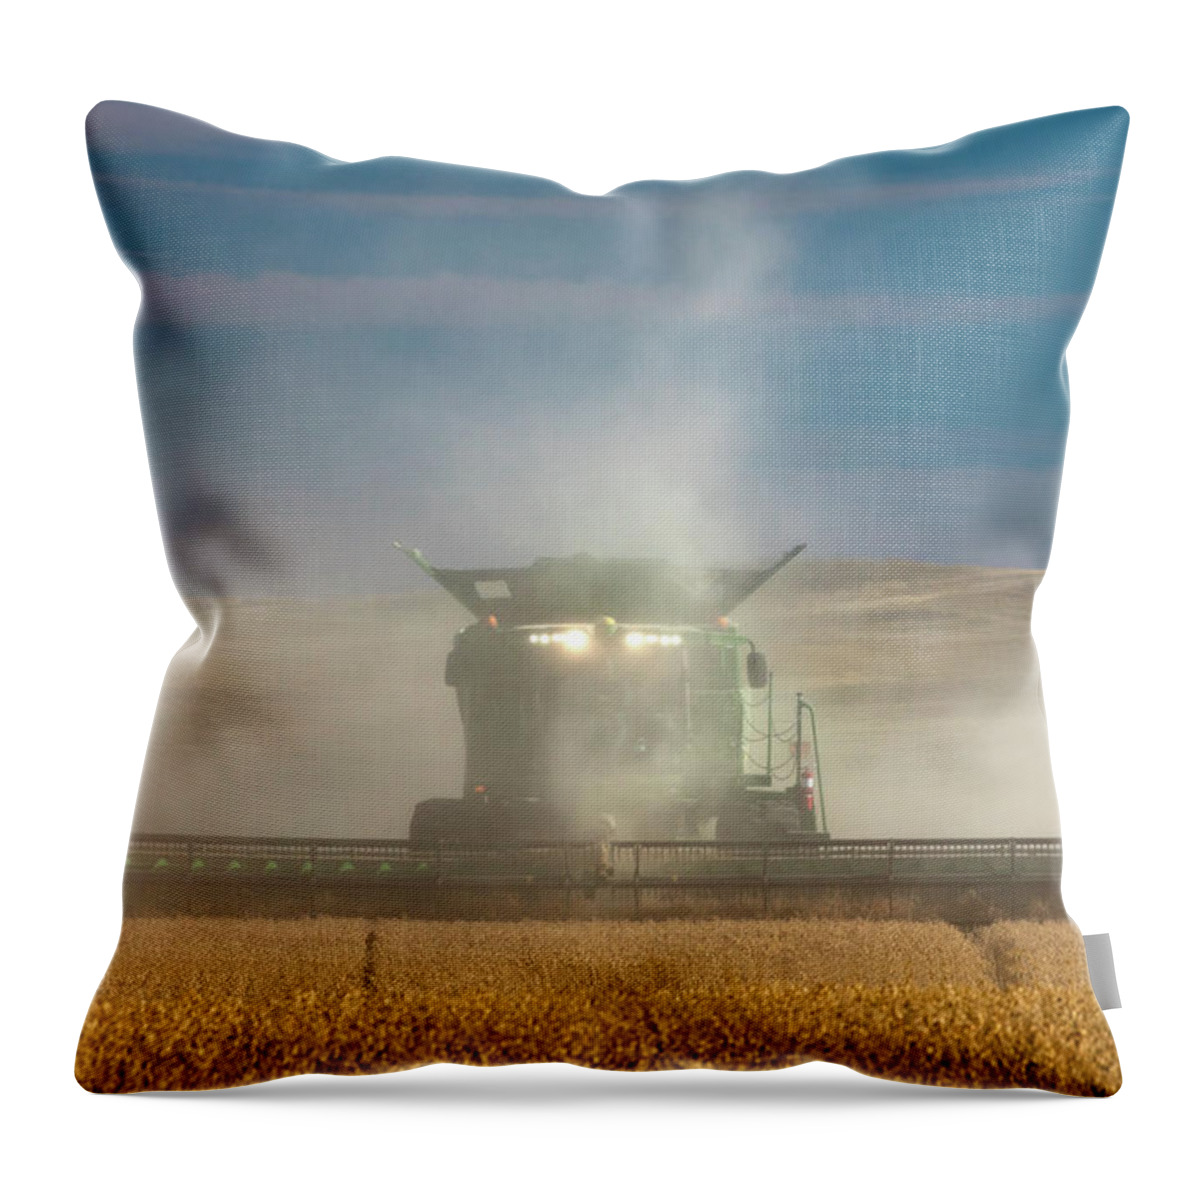 Chickpeas Throw Pillow featuring the photograph Cloudy Cutting by Todd Klassy